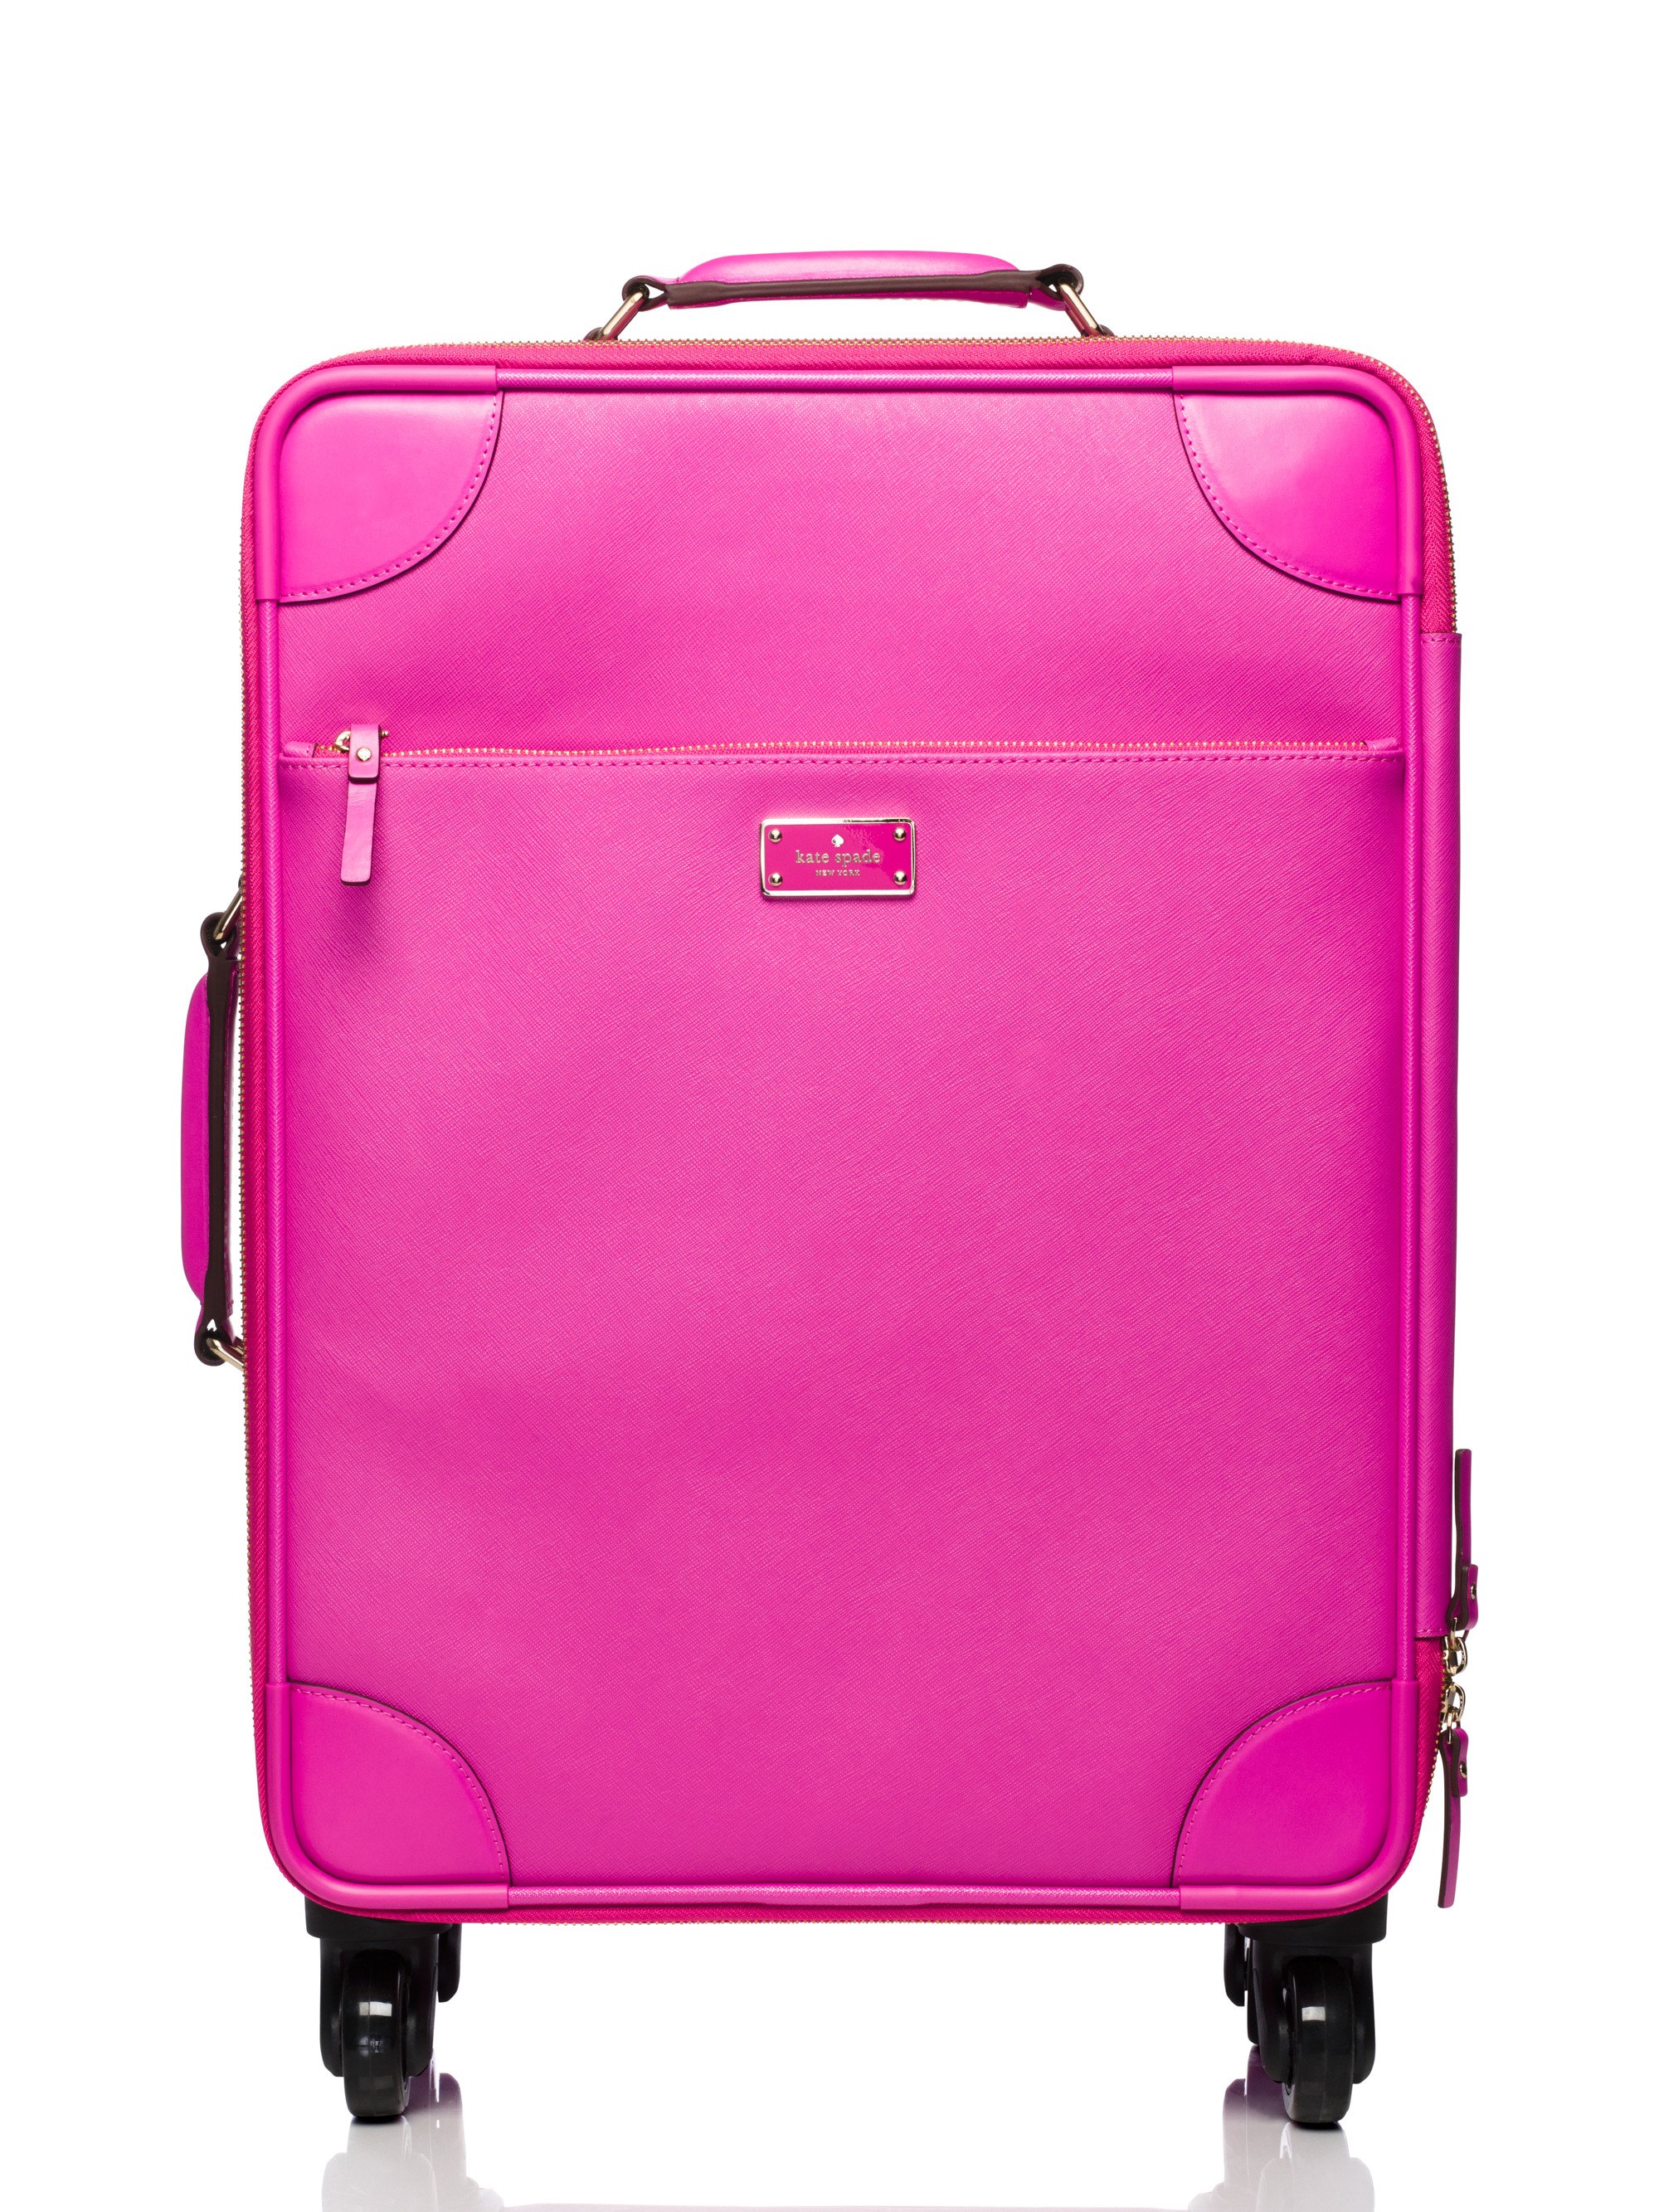 Lyst - Kate Spade New York Bon Voyage Leather International Carry On in Pink